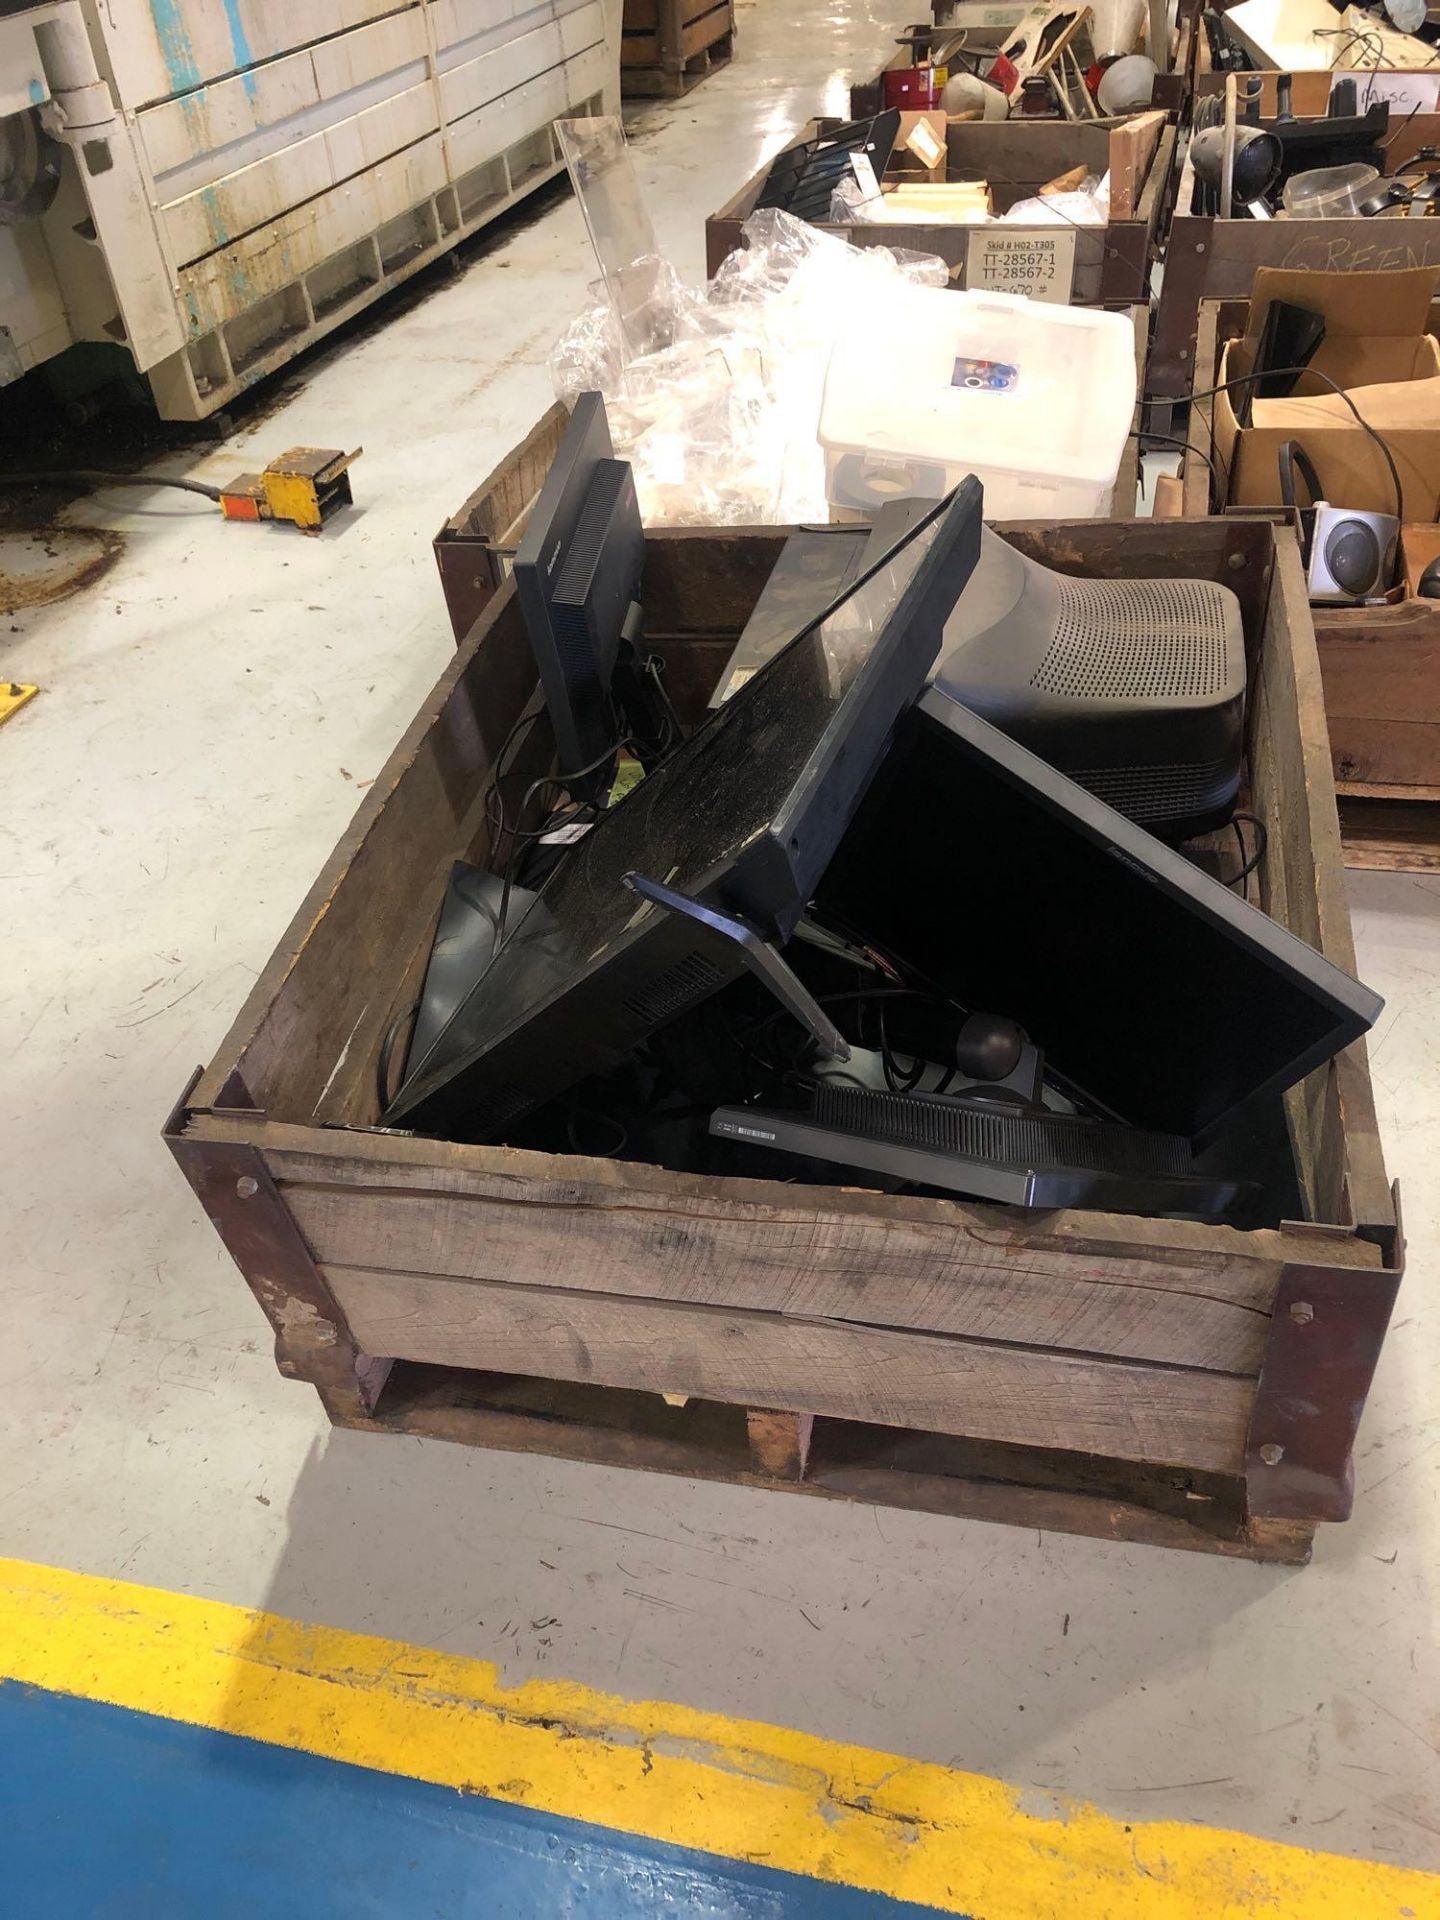 Lot of misc. computer items and TVs in wood crate